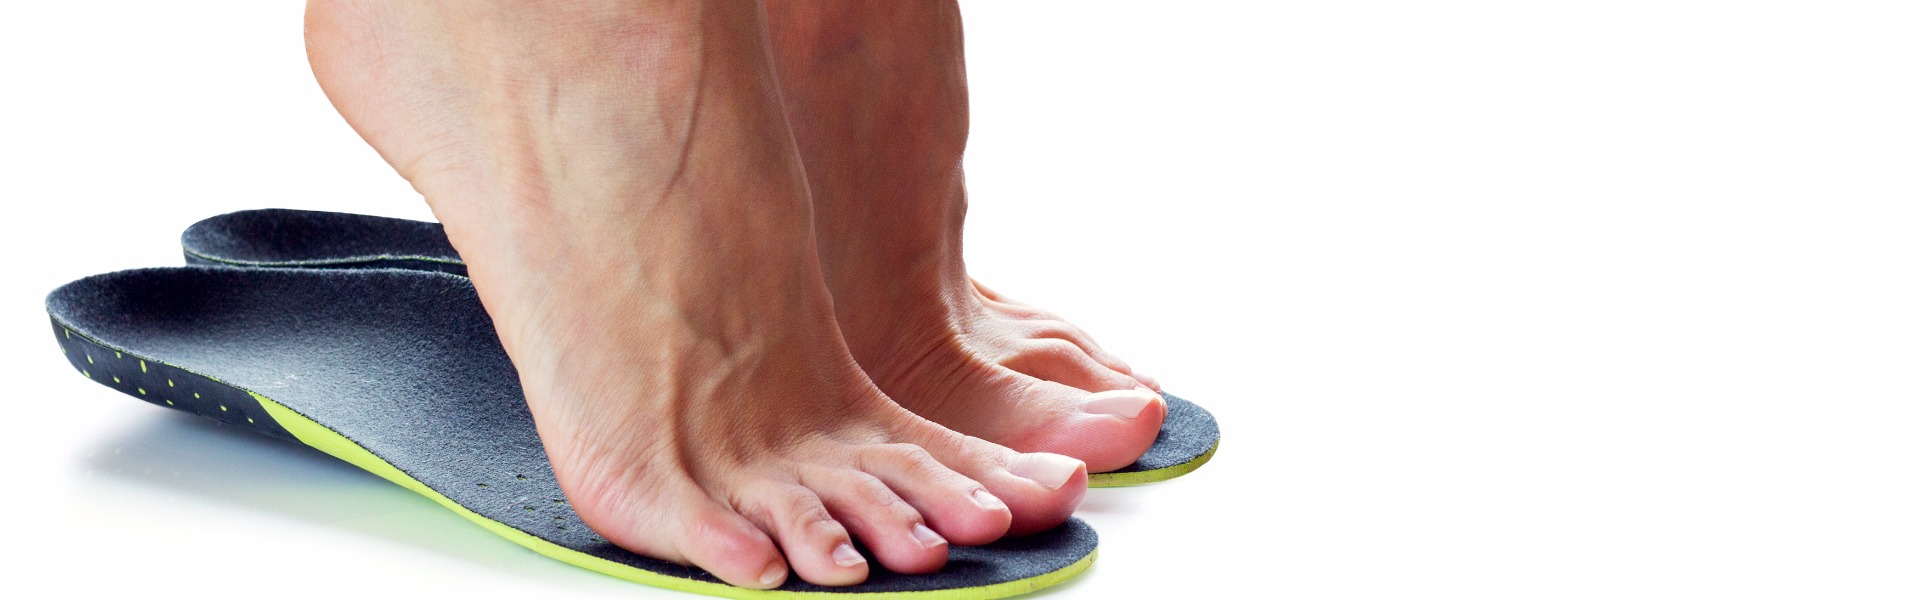 shoes to wear with orthotic insoles